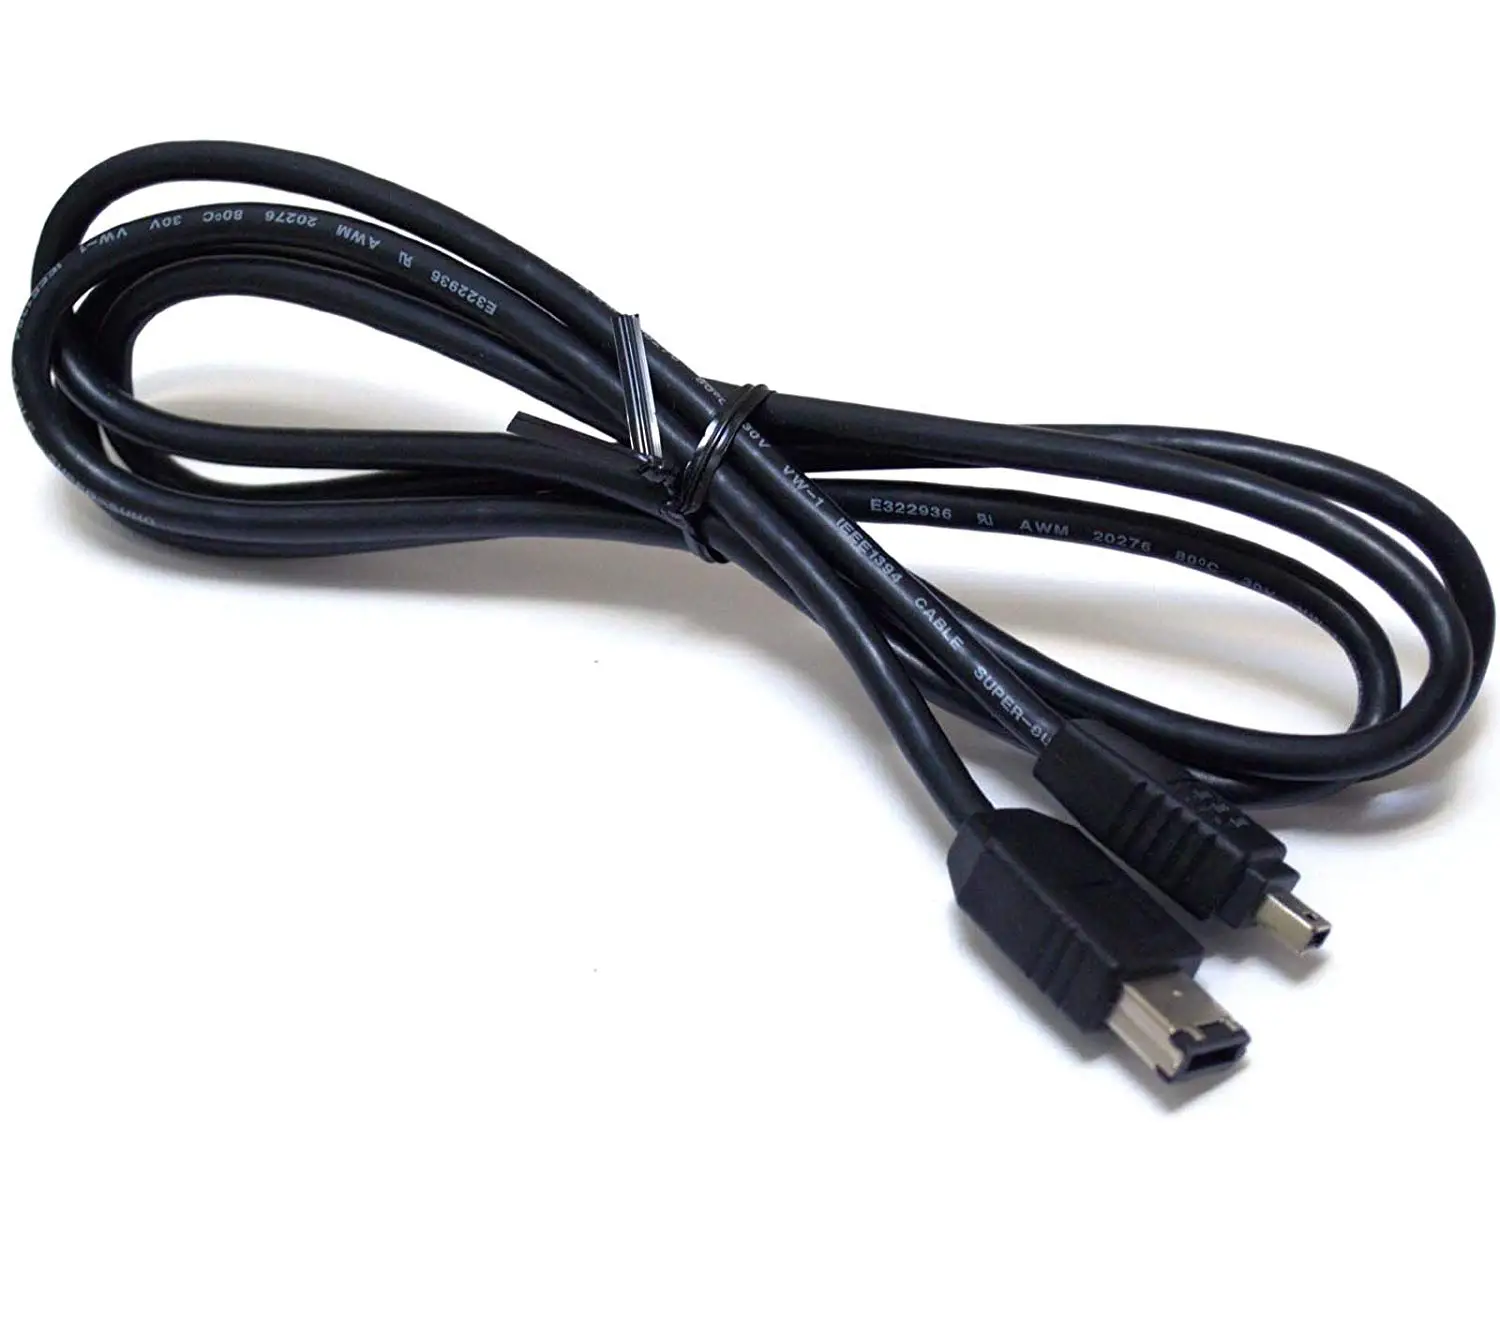 sony handycam firewire ieee 1394 to usb cable